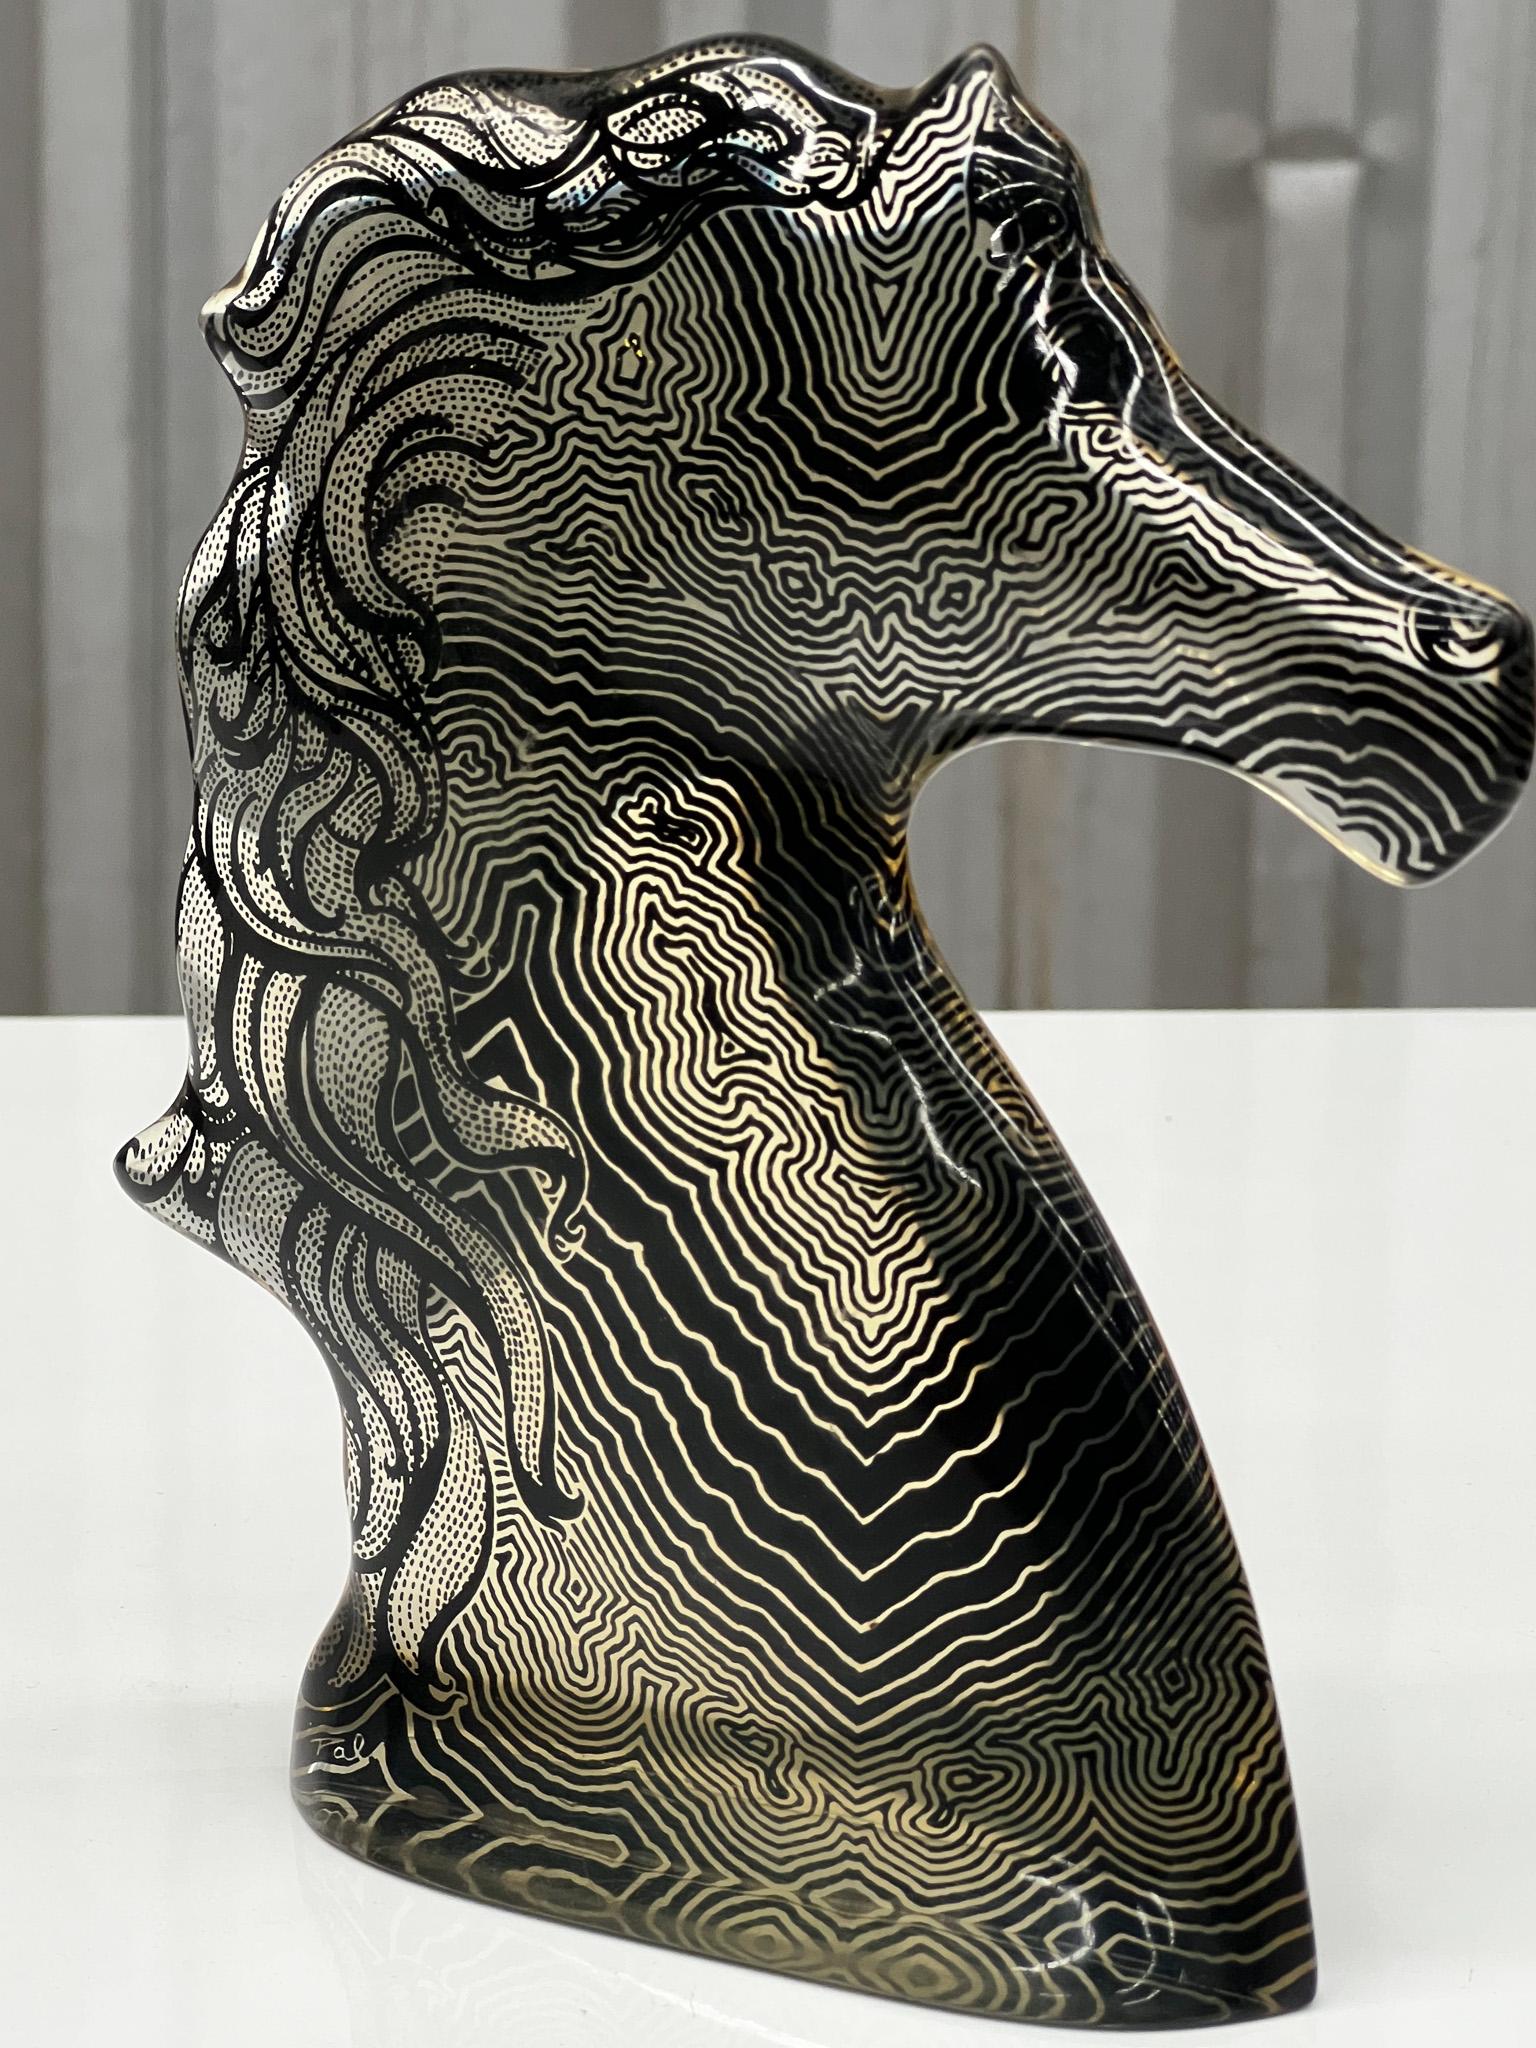 Brazilian Modern Kinetic Sculpture of a Horse in Resin, Abraham Palatinik, 1960s For Sale 1